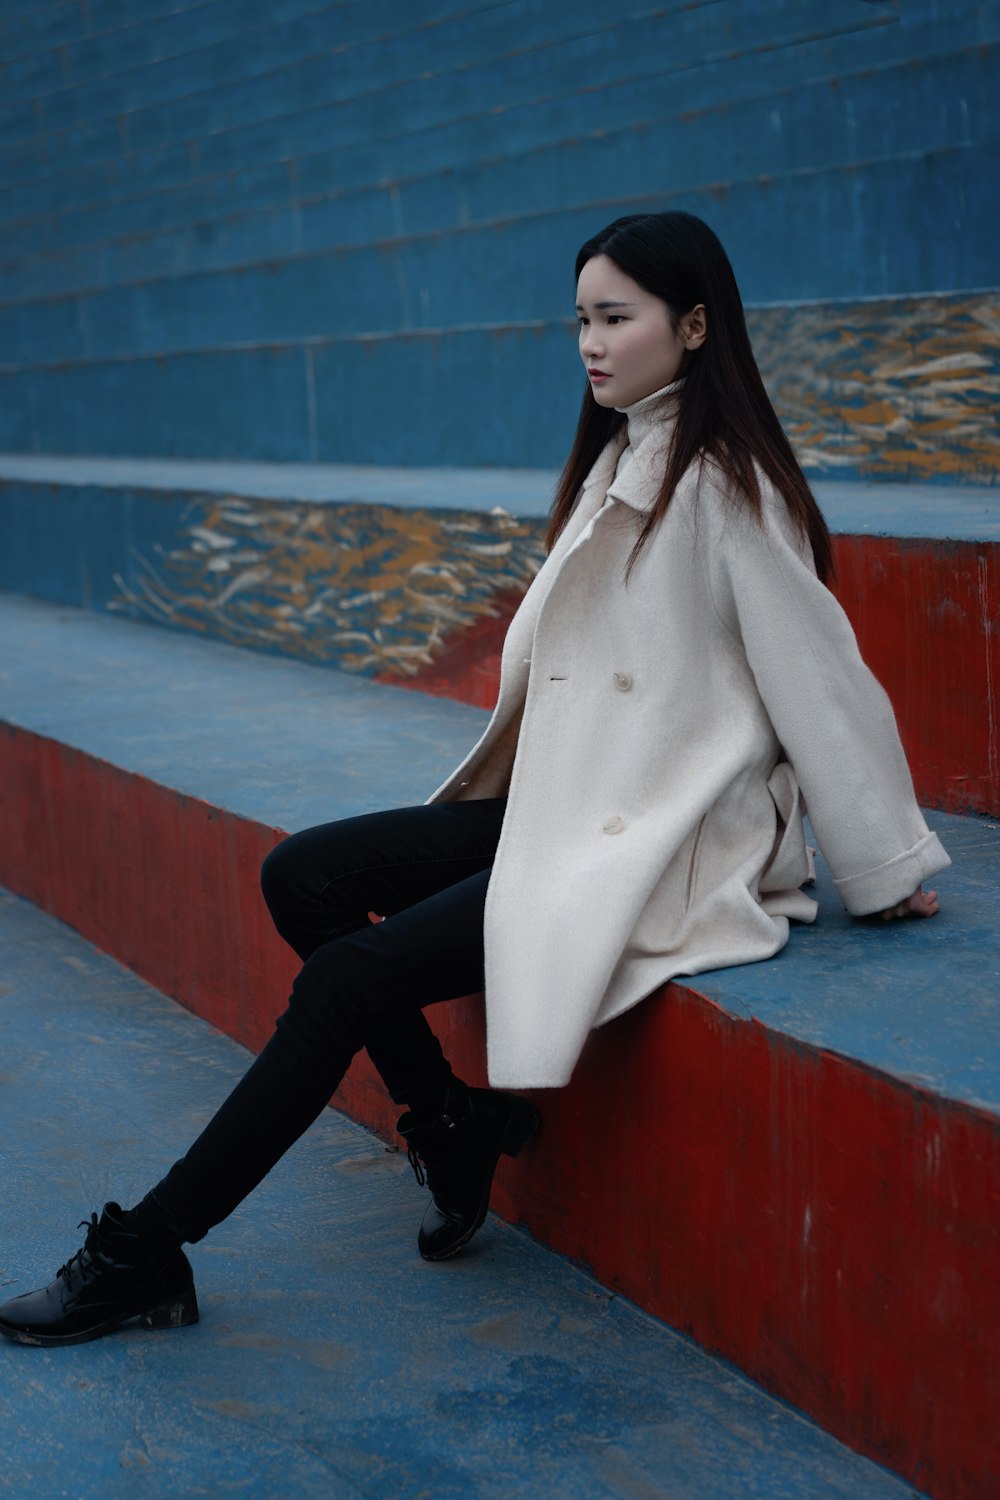 woman in white coat and black pants sitting on red concrete bench